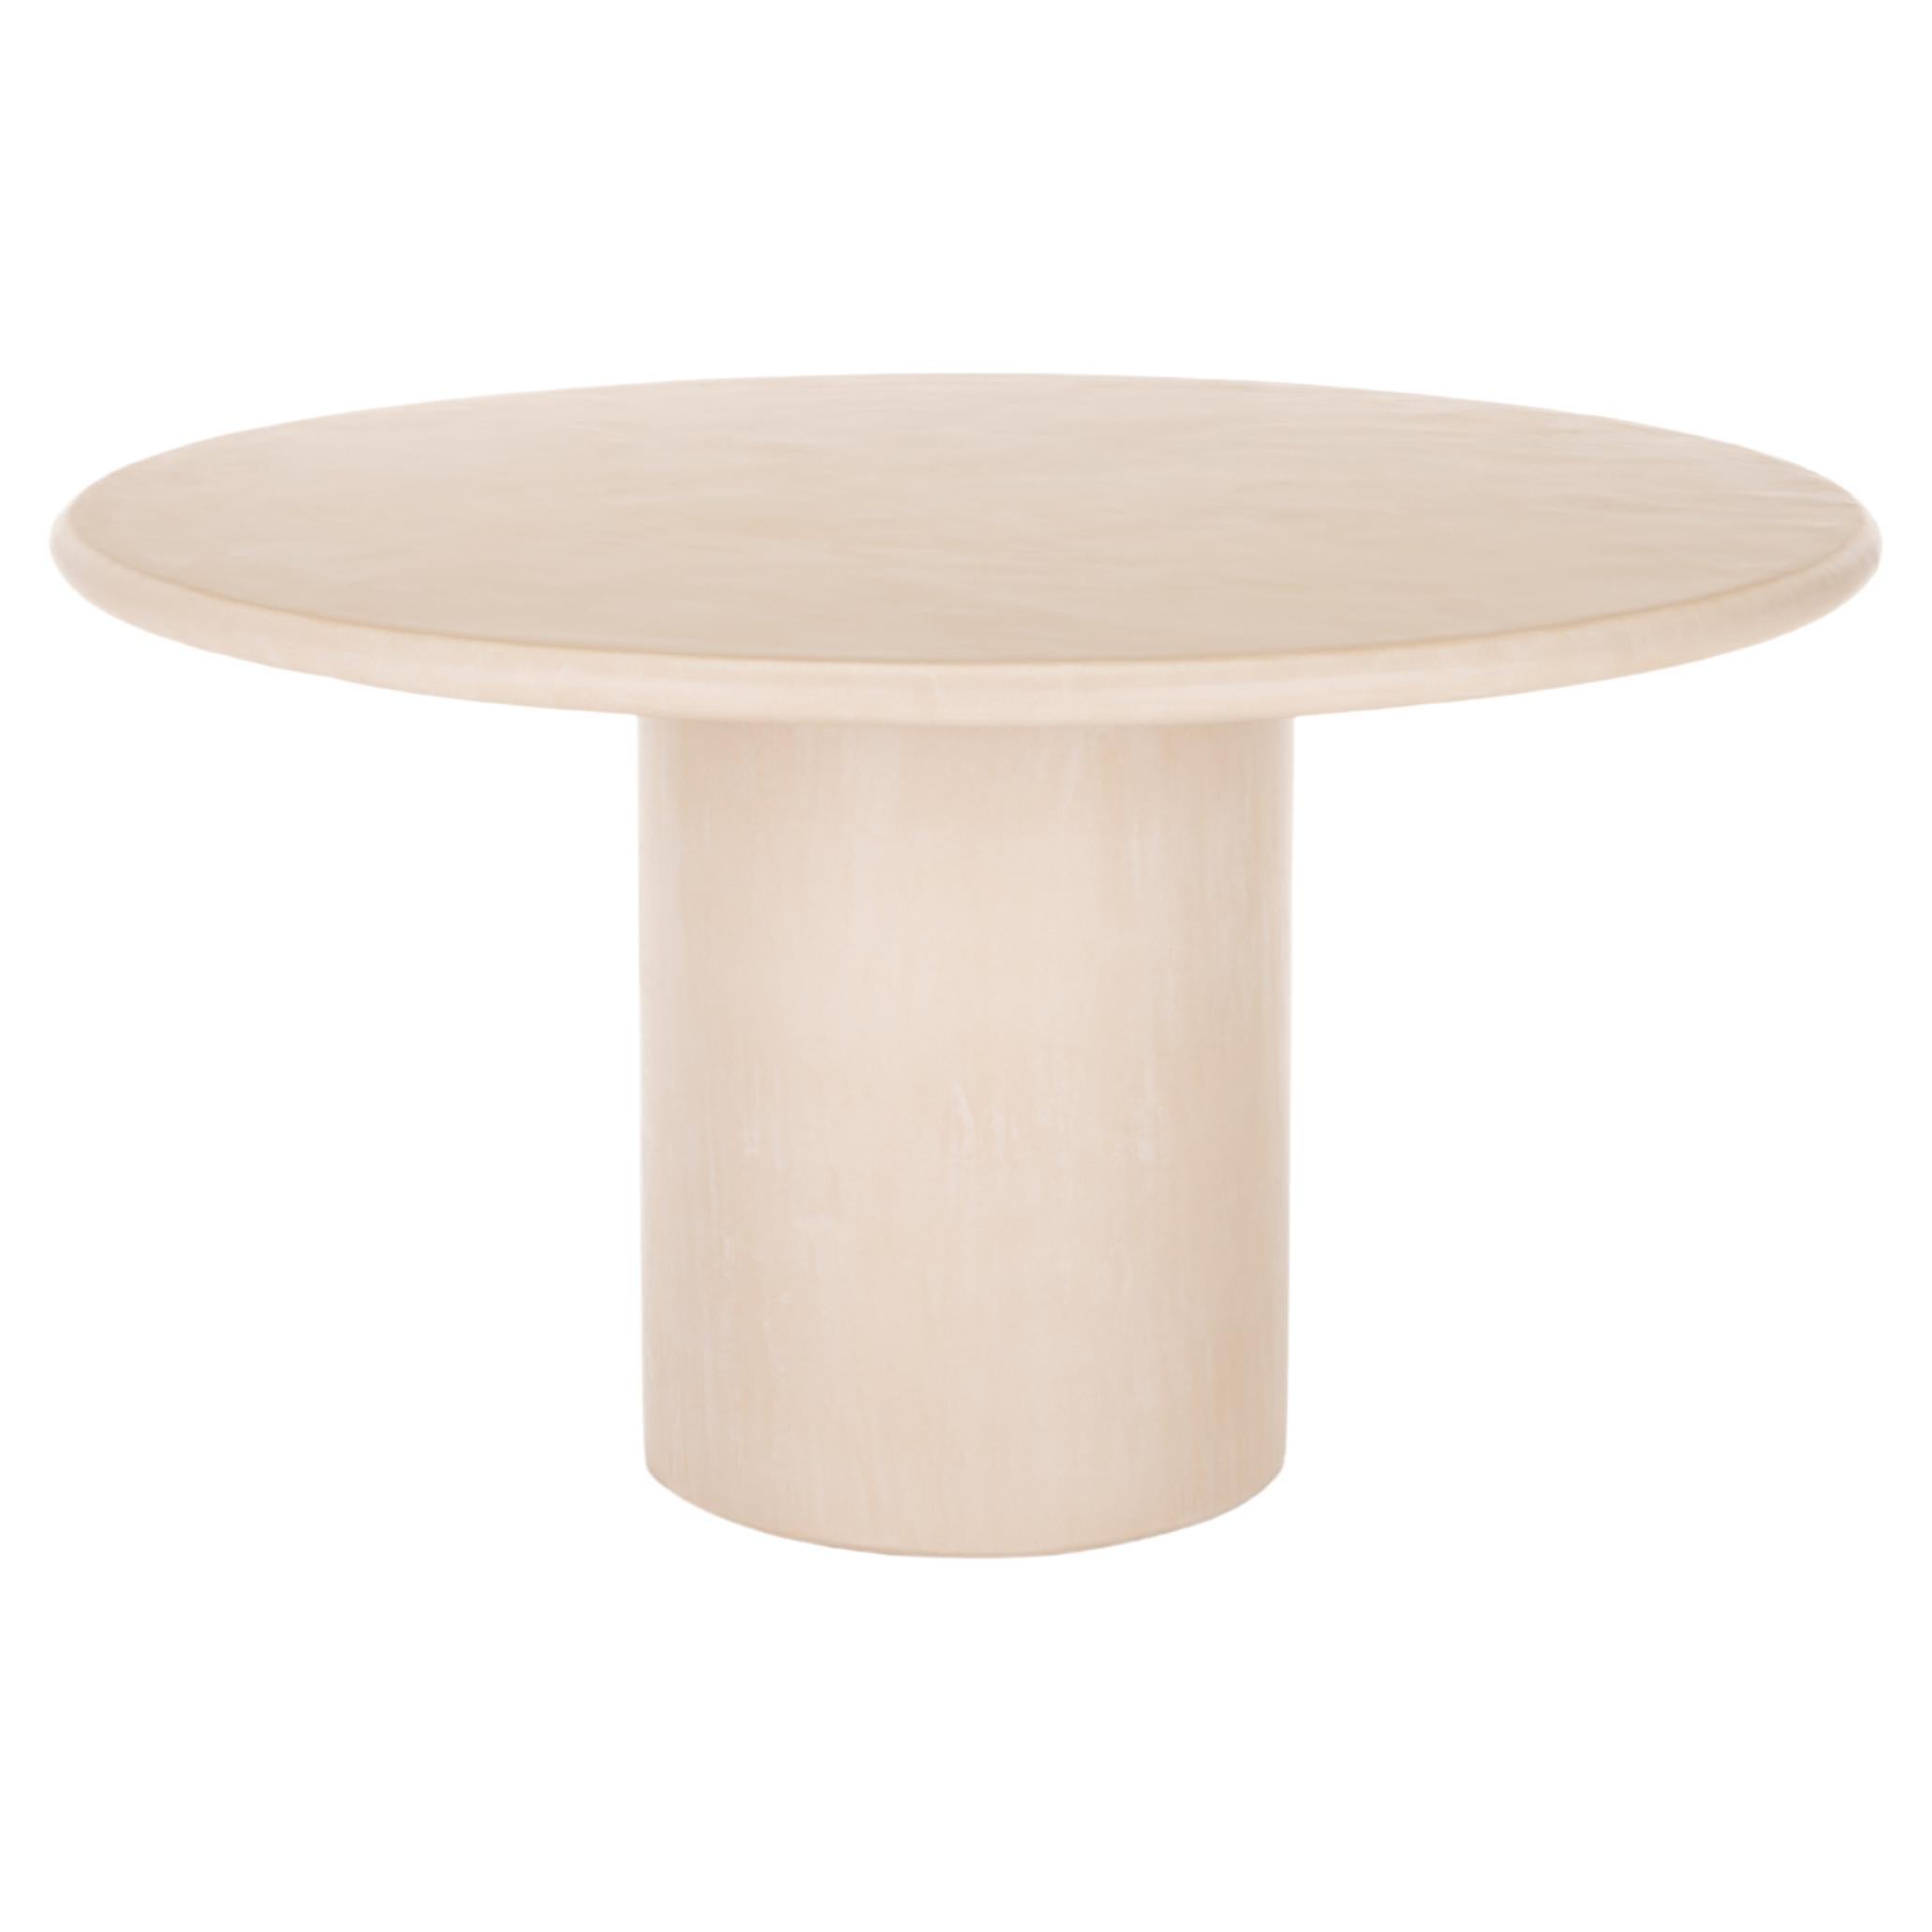 Natural Plaster Dining Table "Column" 160 by Isabelle Beaumont For Sale